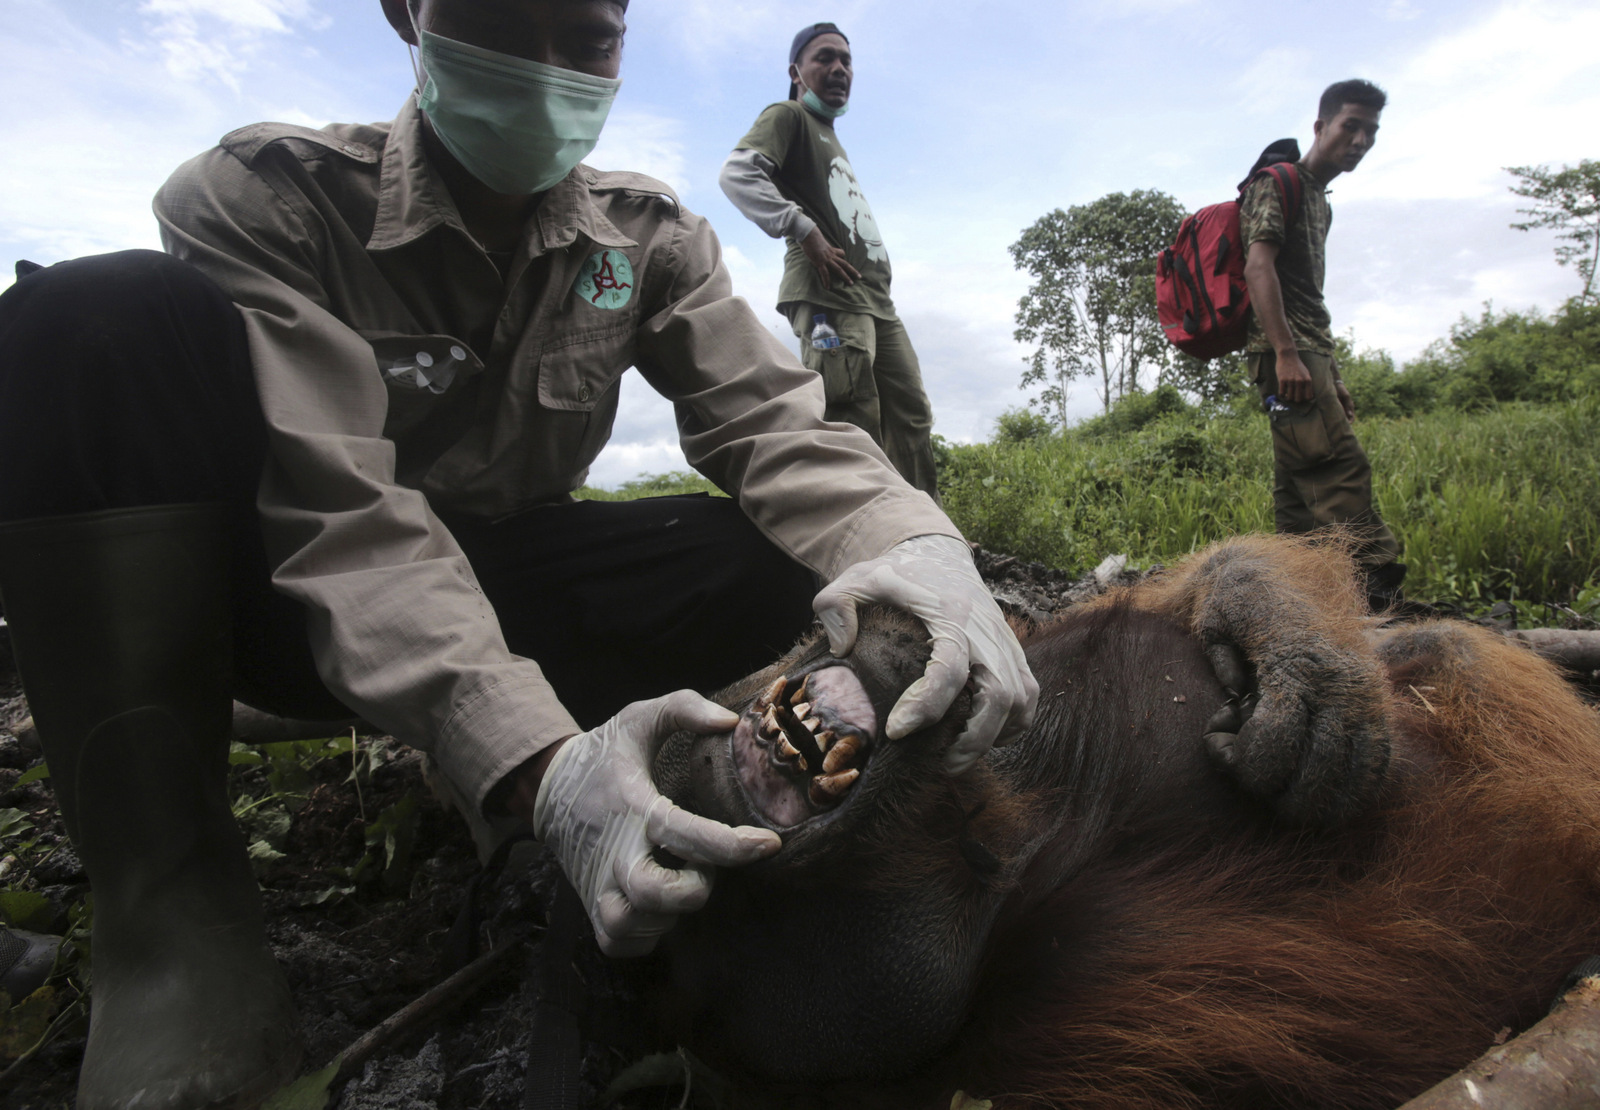 In this Thursday, Aug. 10, 2017 photo, a veterinarian of Sumatran Orangutan Conservation Program (SOCP) Pandu Wibisono examines a tranquilized male orangutan being rescued from a forest located too close to a palm oil plantation at Tripa peat swamp in Aceh province, Indonesia. Conservationists relocated the orangutan they named "Black" to a reintroduction center in Jantho, Aceh Besar, where he will join about 100 other primates that have been released in the jungle there to establish a new wild population. (AP Photo/Binsar Bakkara)